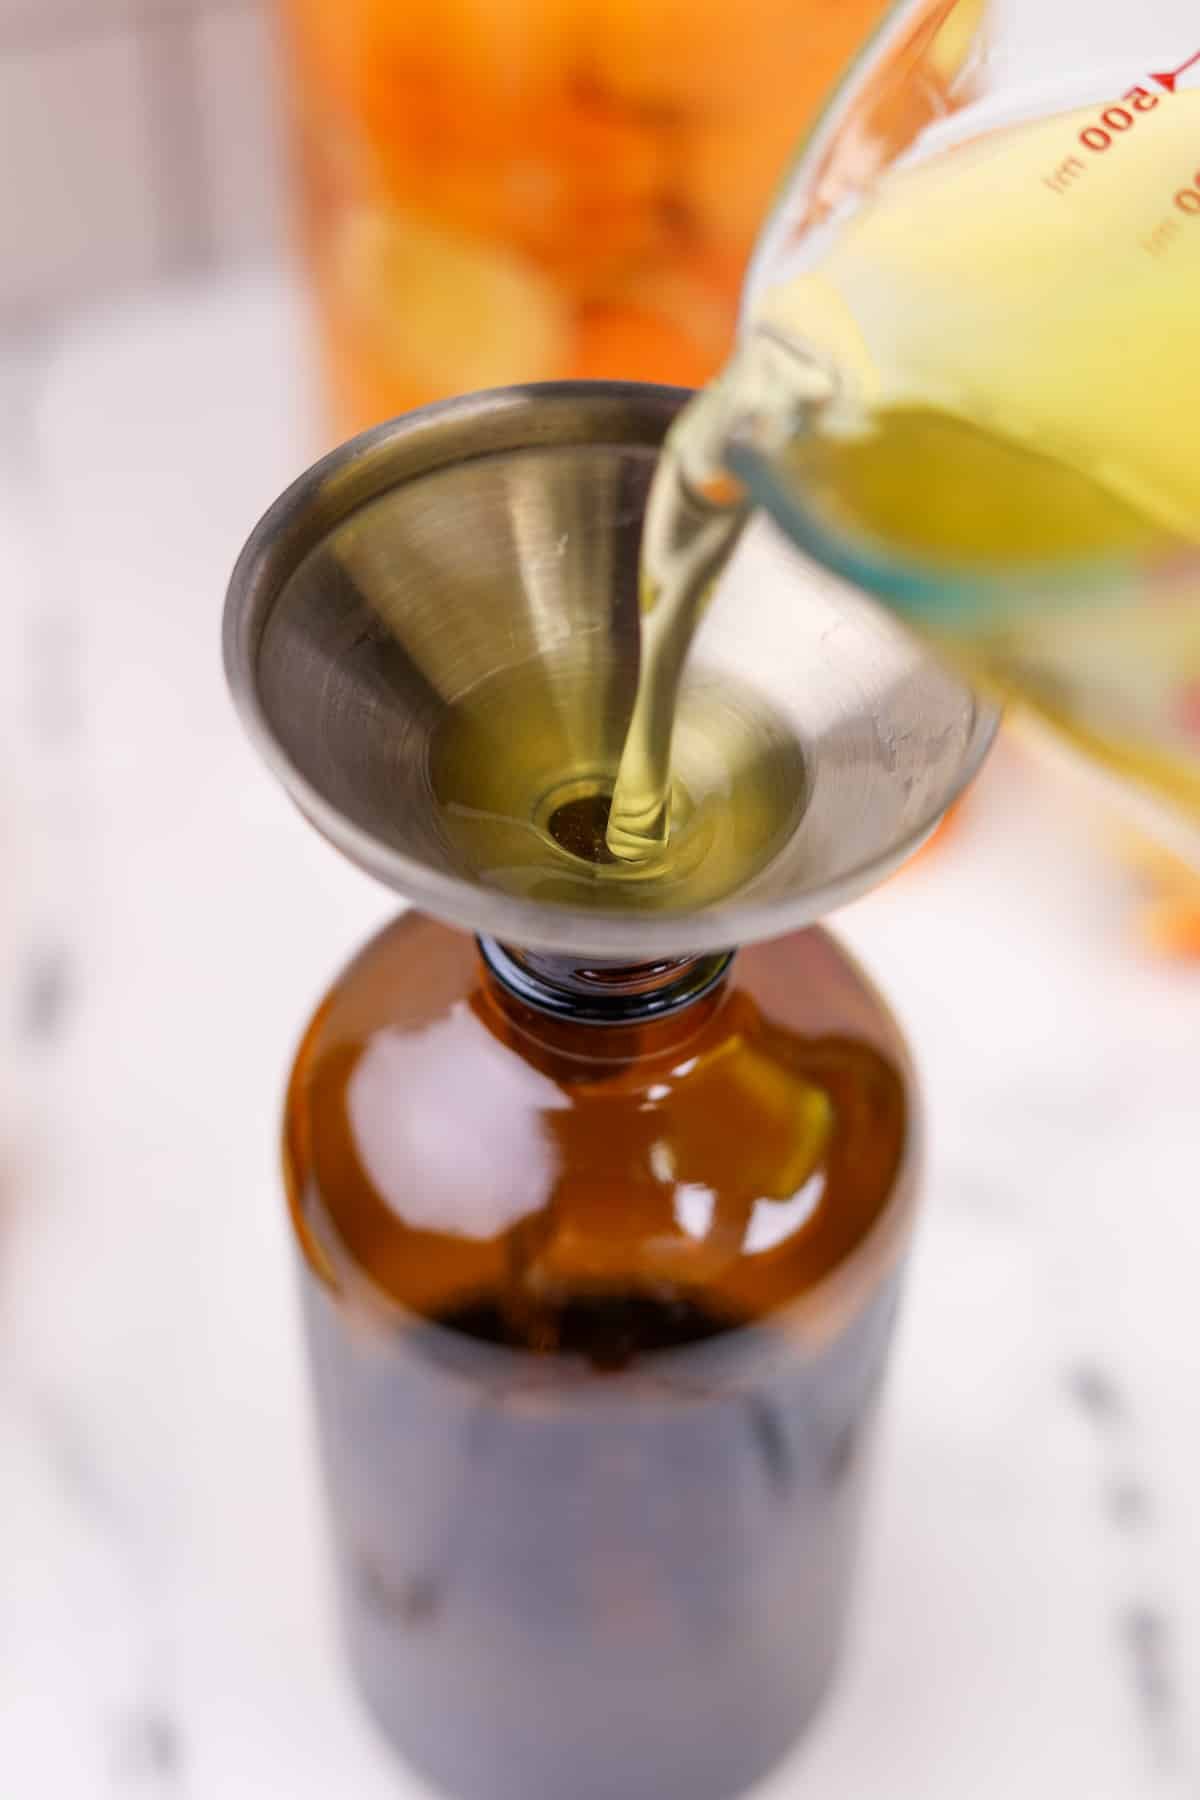 Pouring orange vinegar through a funnel into an amber glass bottle.